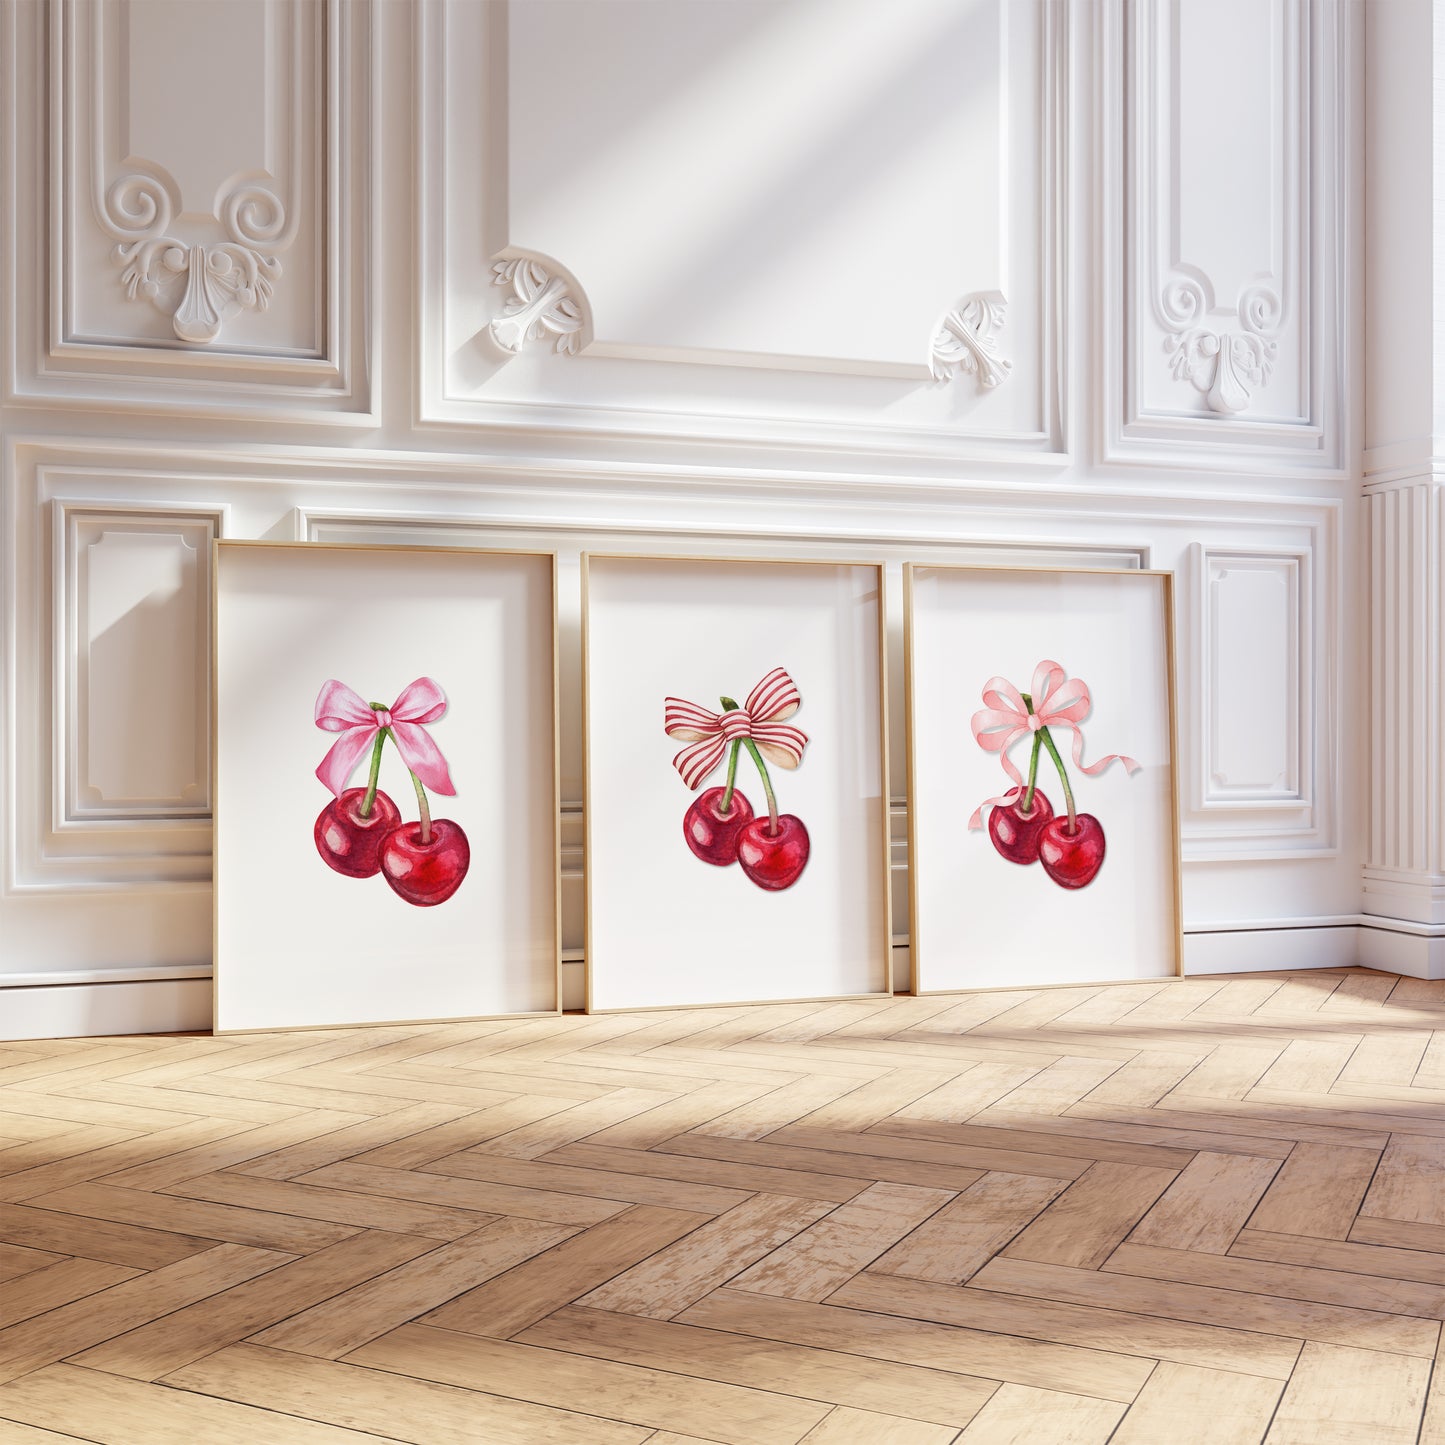 Cherry and Bow Wall Art | Feminine Poster Printed on Premium Paper